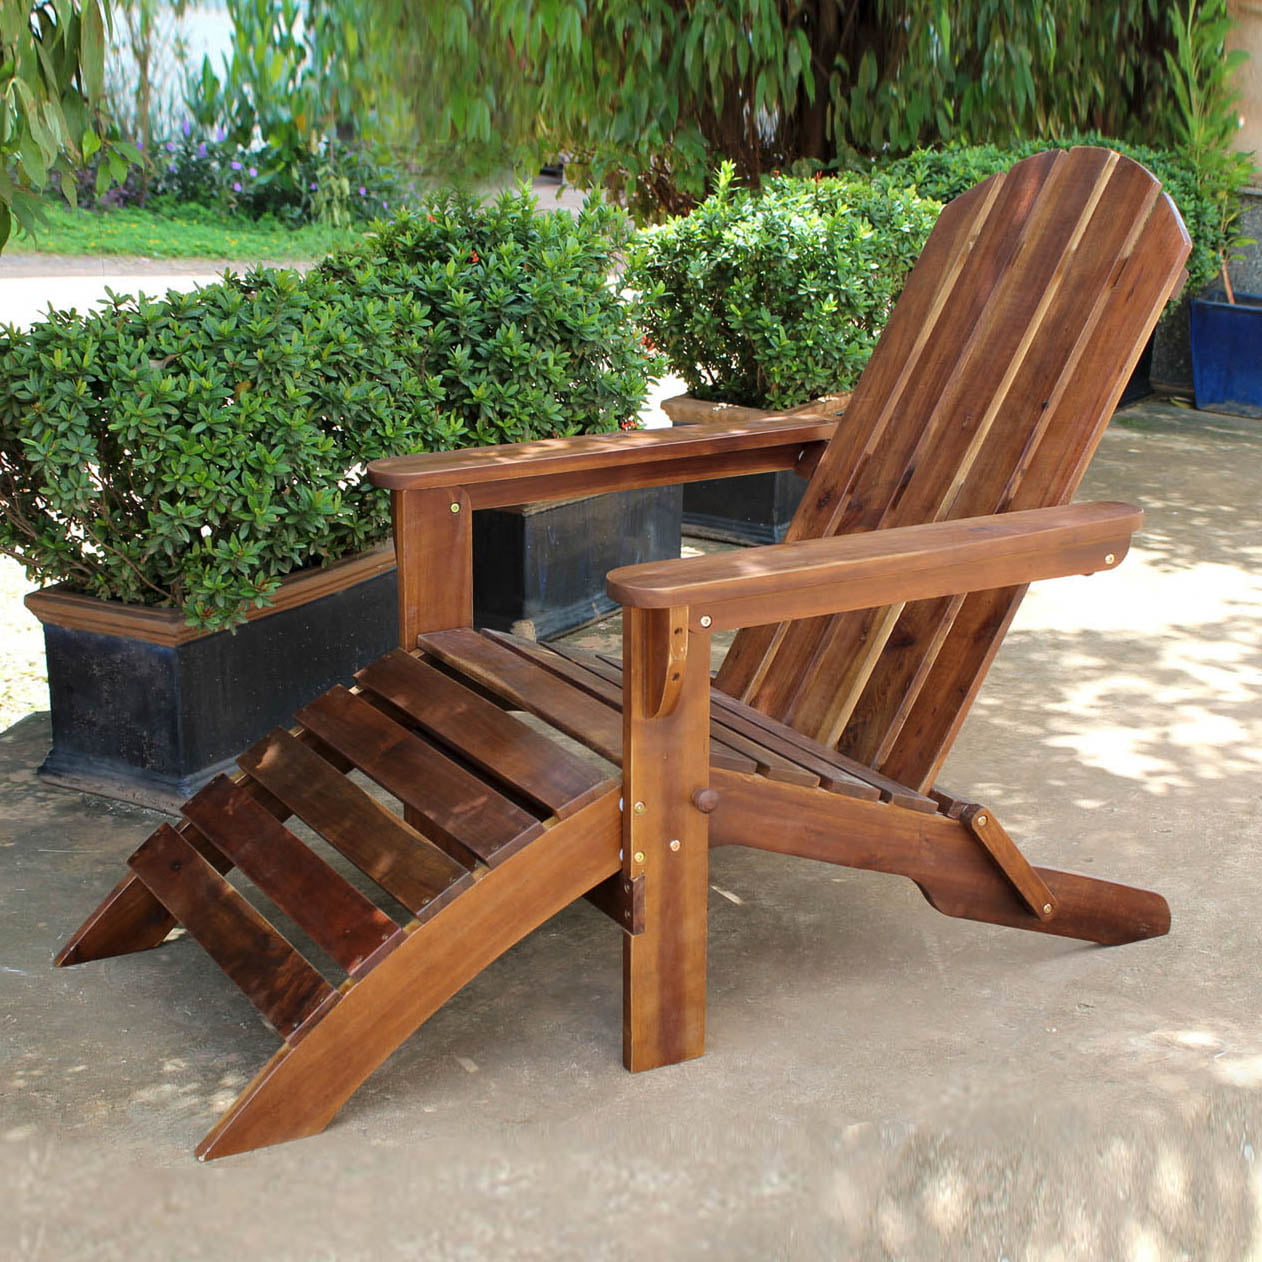 Highland Adirondack Chair with Attached Footrest Walmart